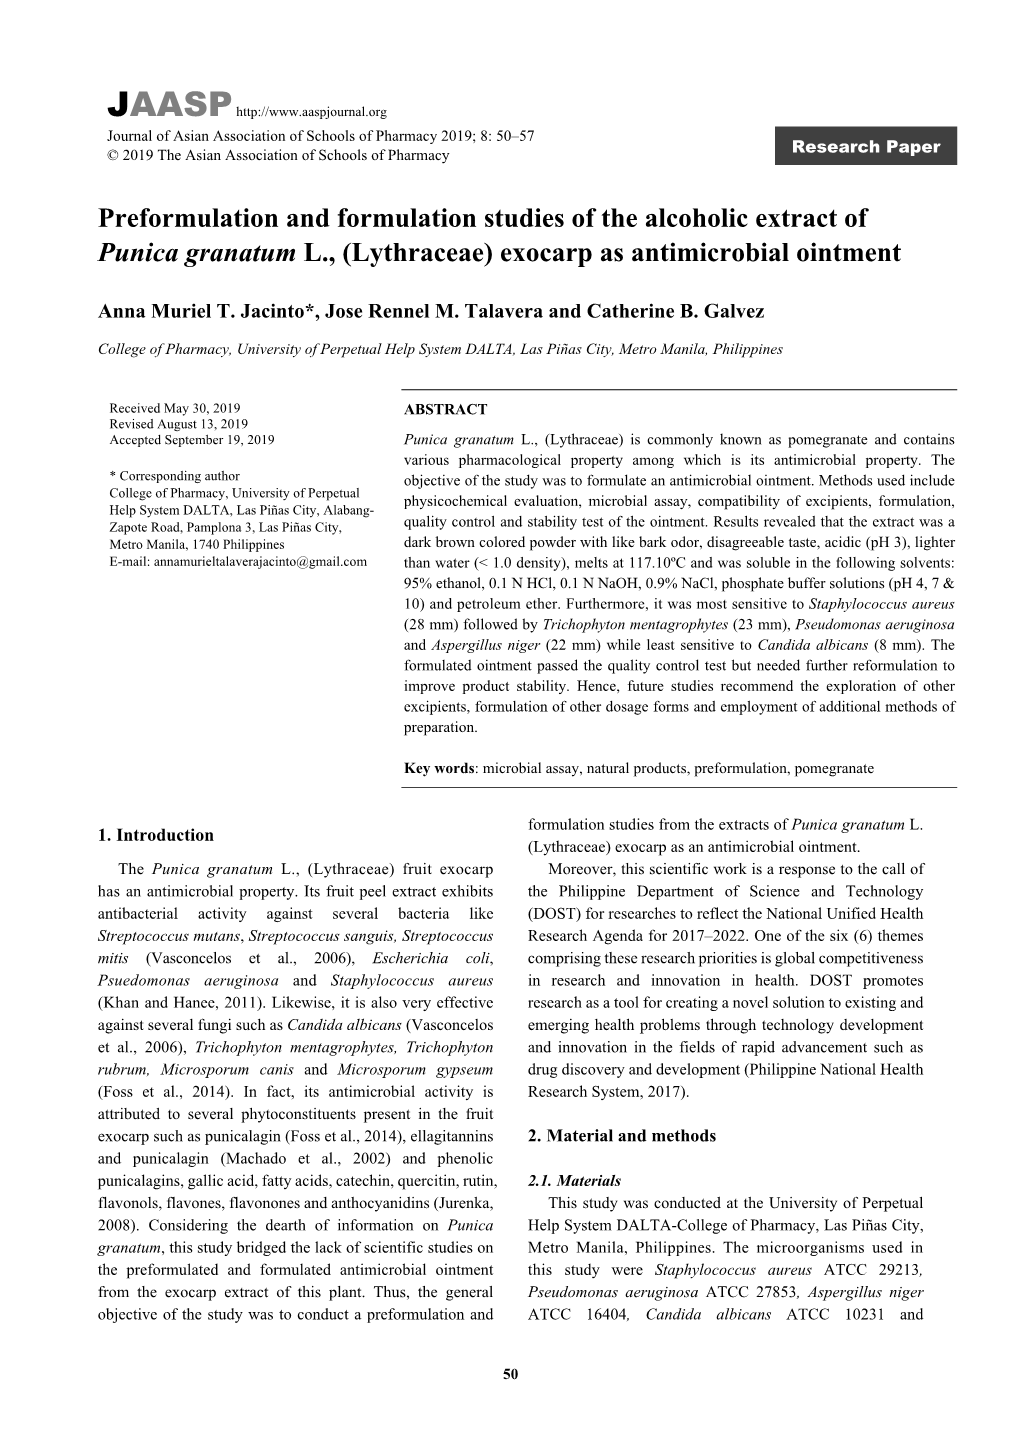 Preformulation and Formulation Studies of the Alcoholic Extract of Punica Granatum L., (Lythraceae) Exocarp As Antimicrobial Ointment